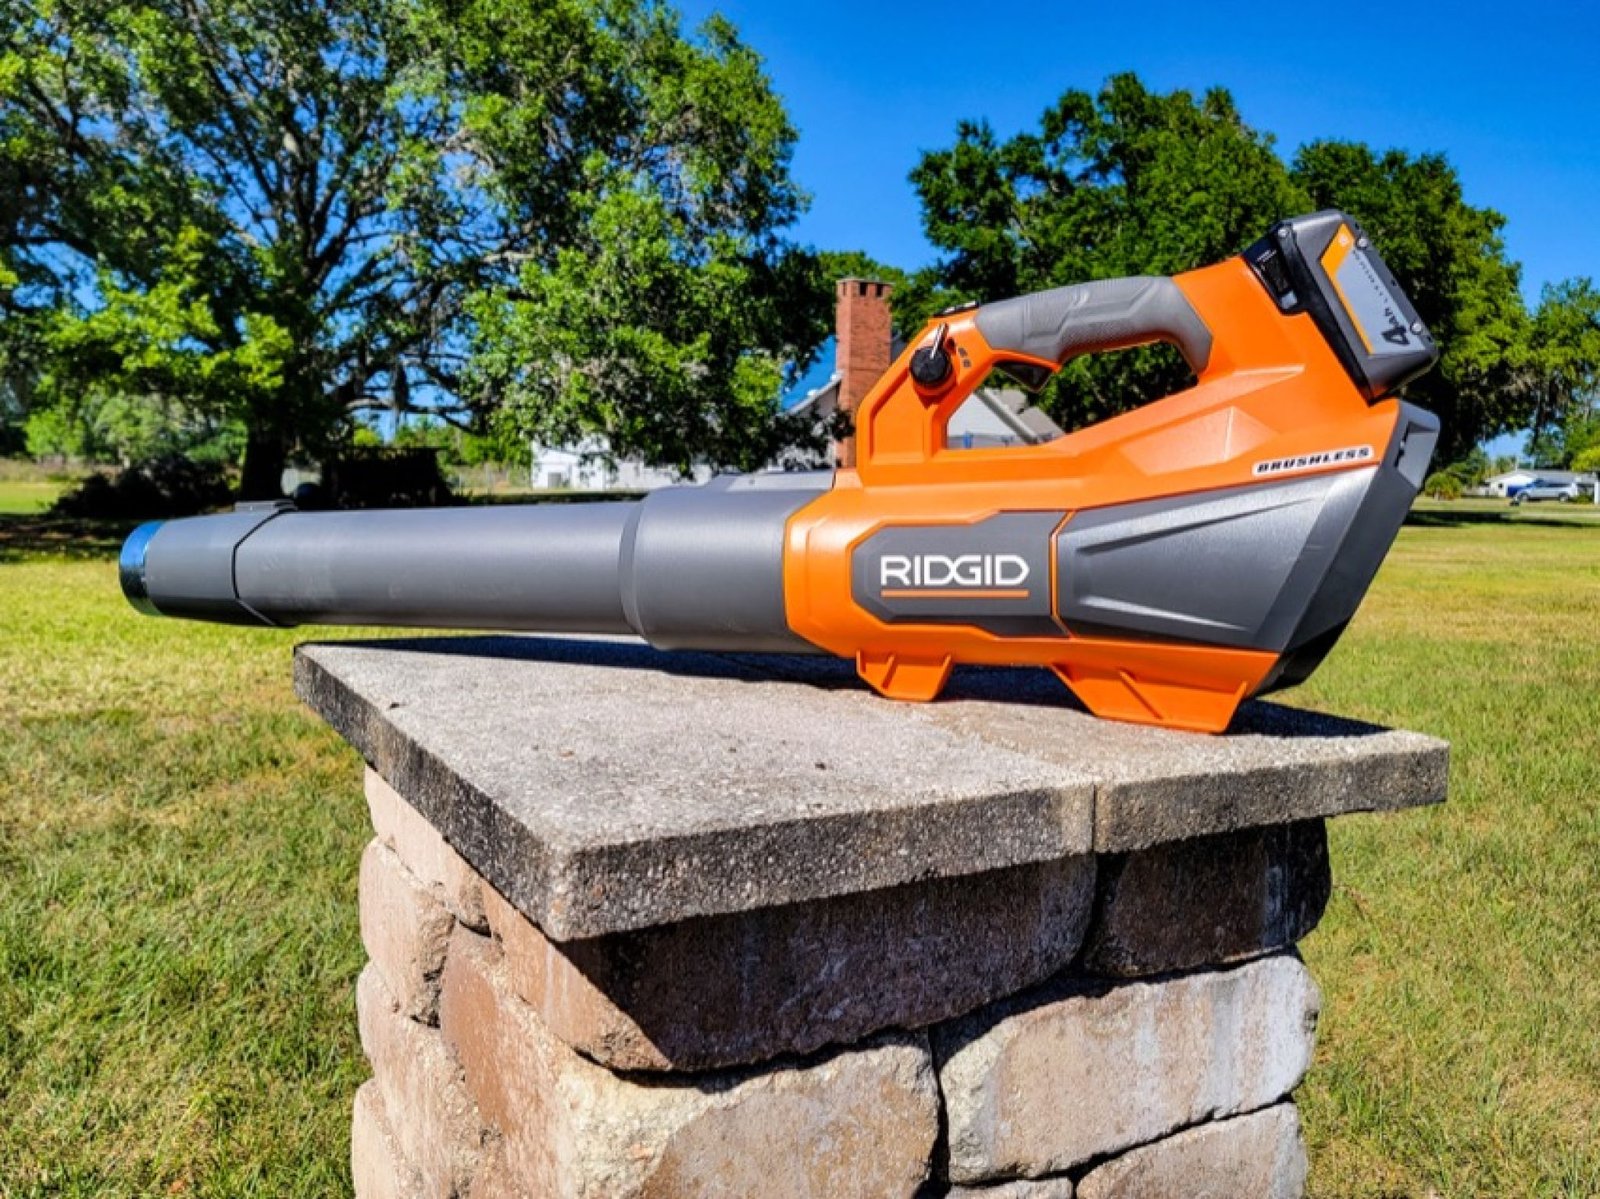 Ridgid 18V BatteryPowered Leaf Blower Review Pro Tool Reviews ToolKit